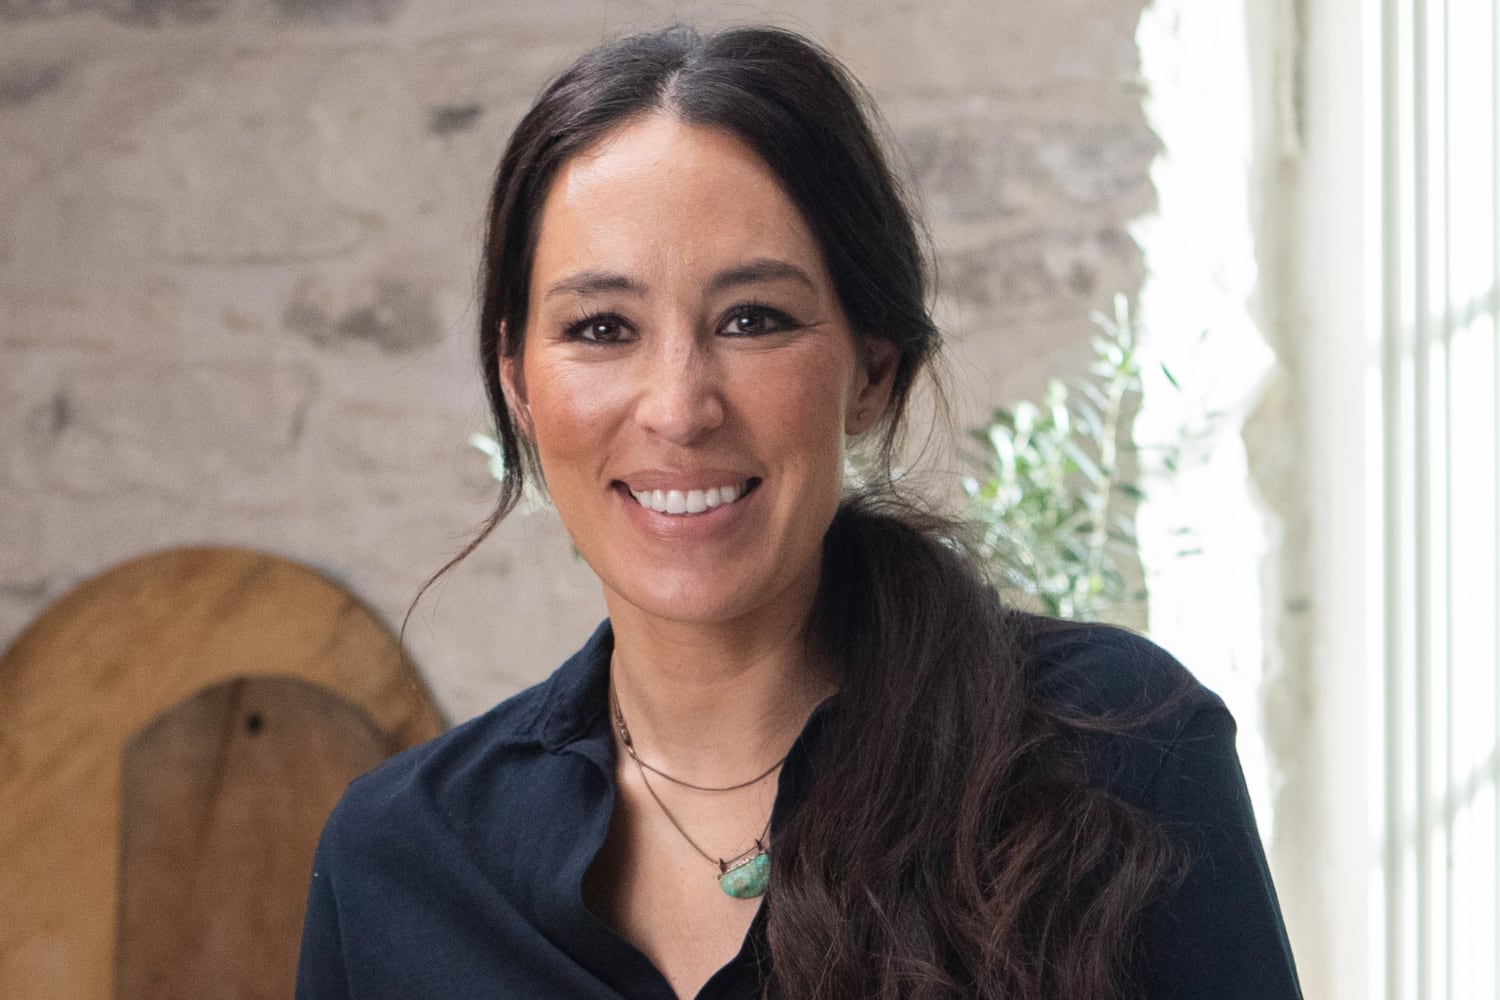 Joanna Gaines posing a smile on the set of 'Magnolia Table'